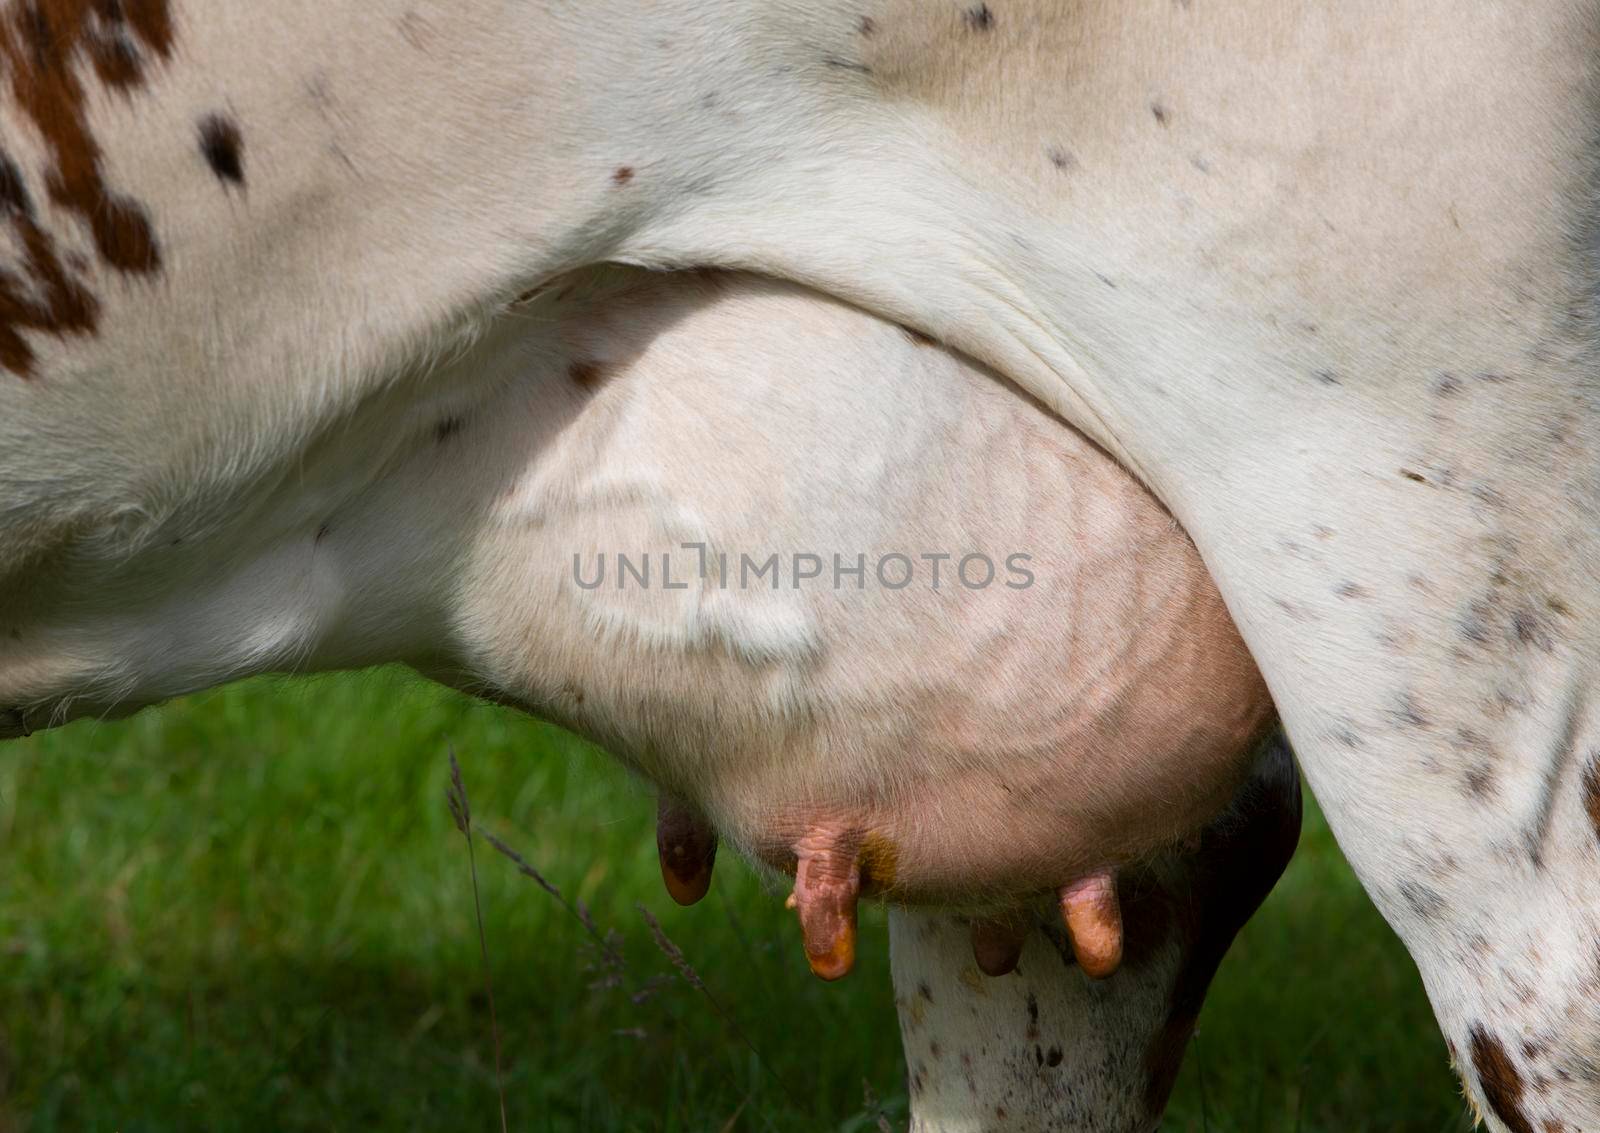 full udder under spotted cow in green grassy meadow in closeup